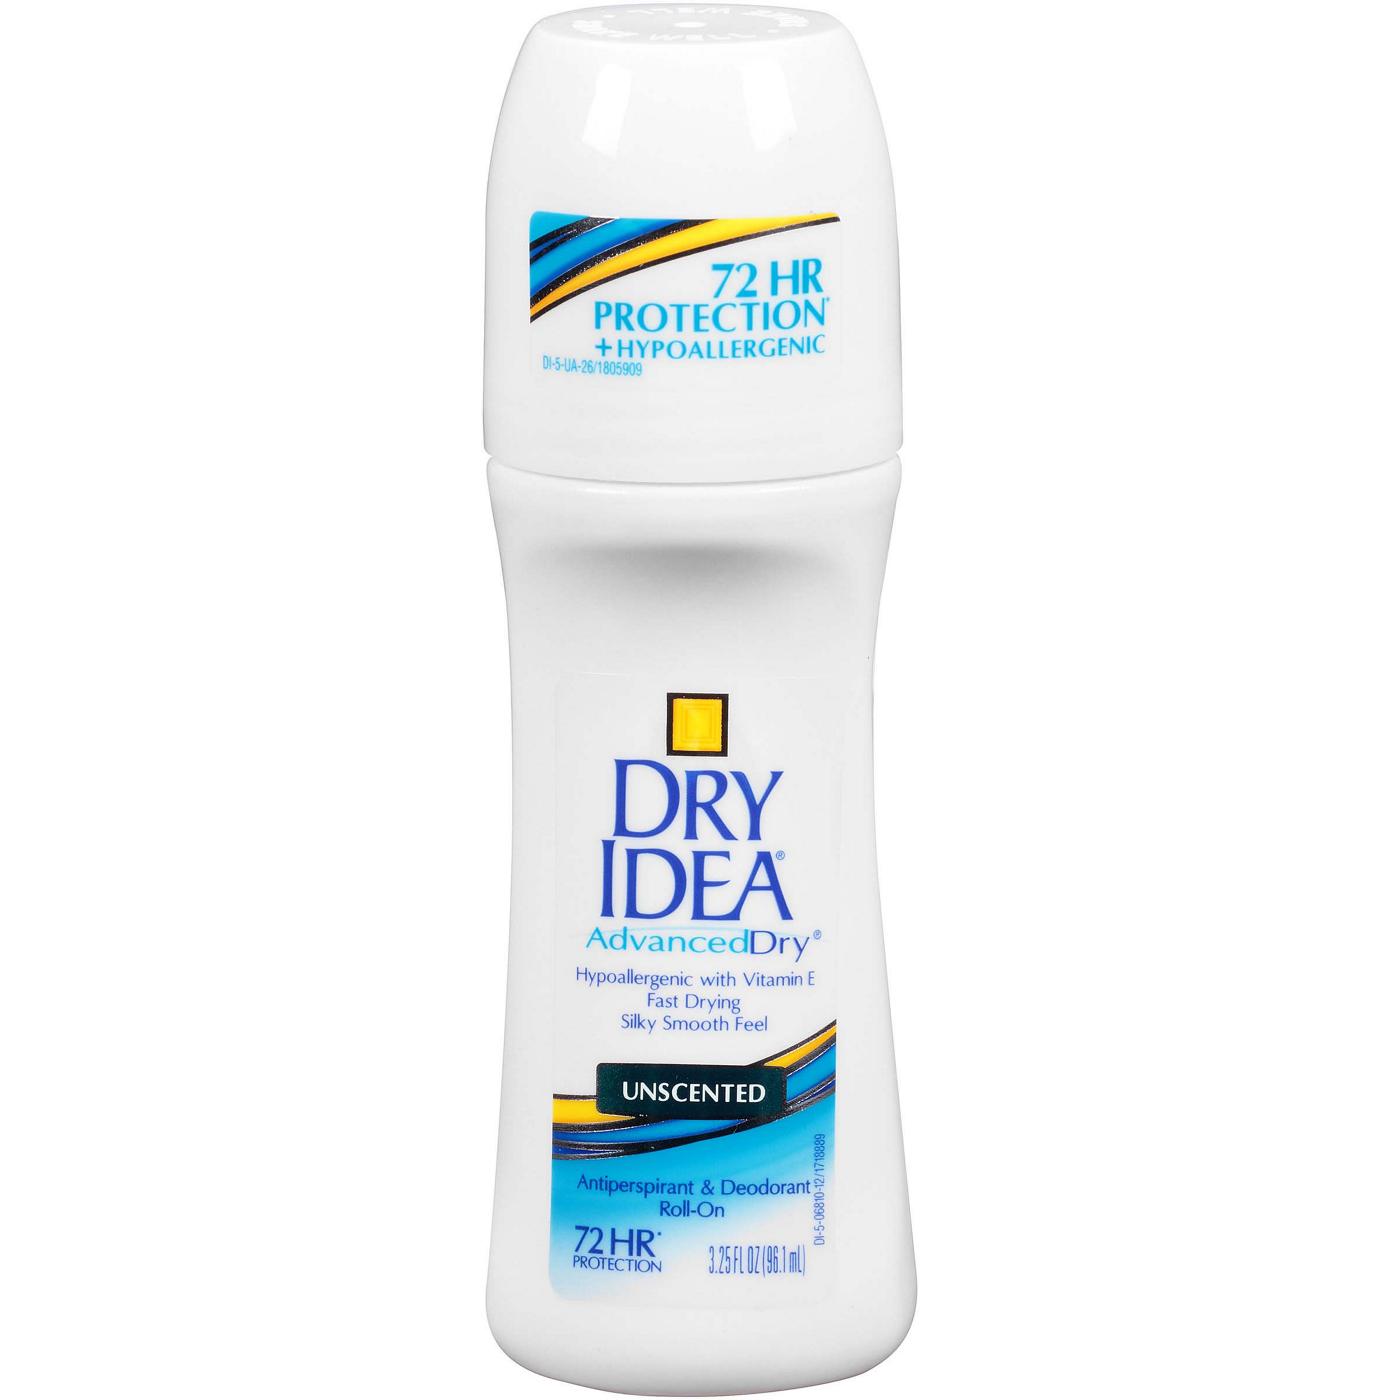 Dry Idea Antiperspirant Deodorant Roll On, Unscented; image 1 of 2